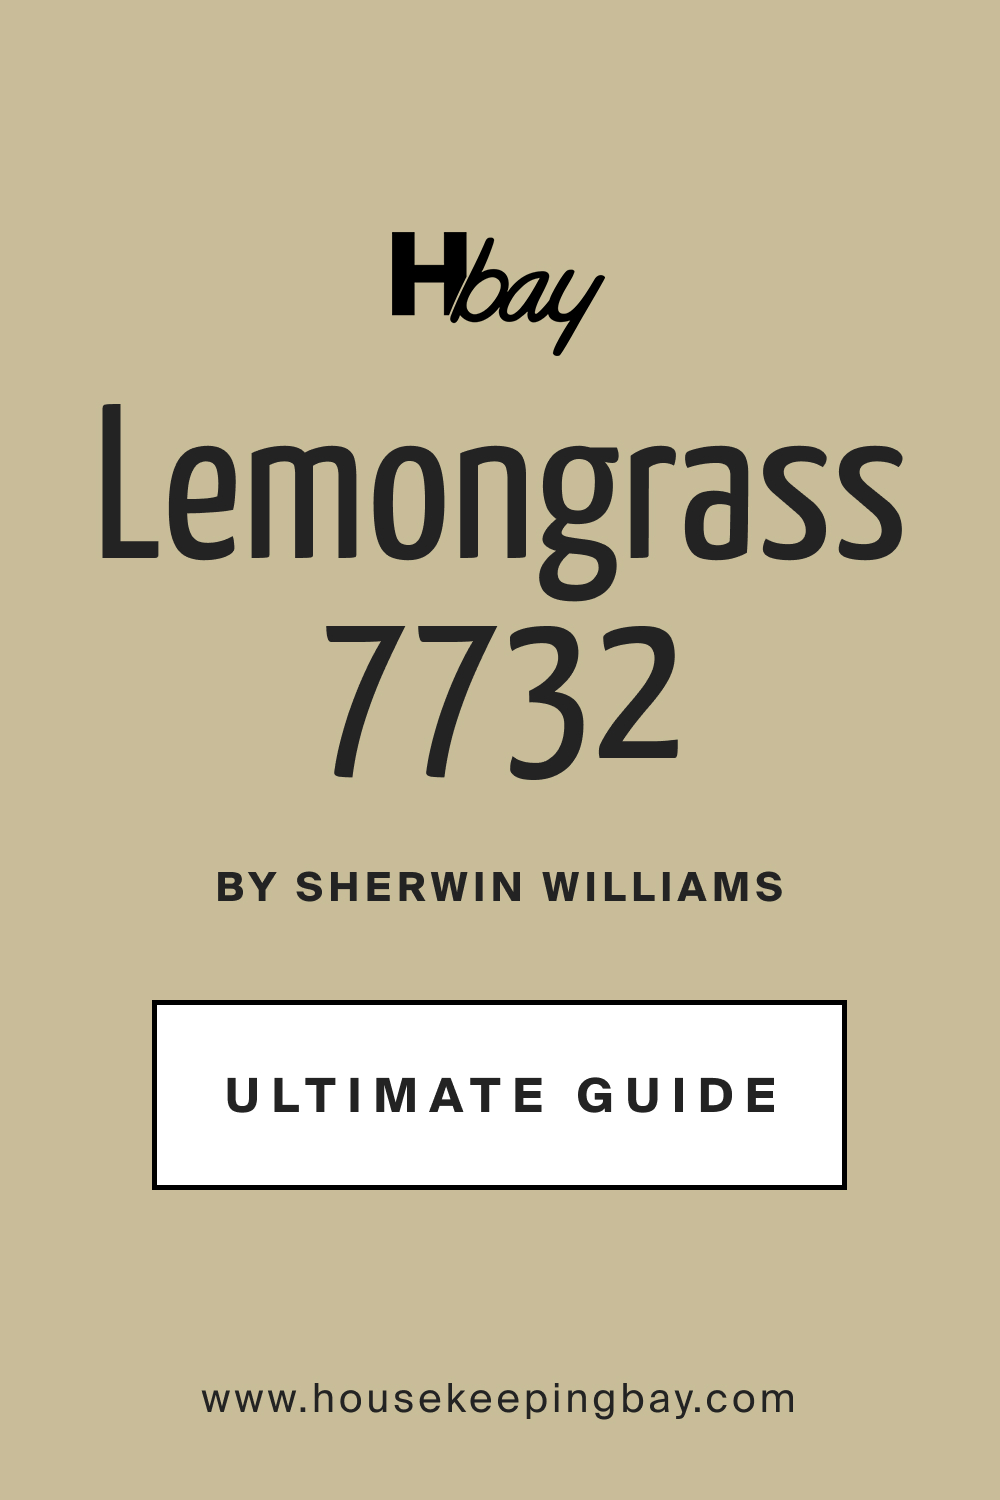 SW 7732 Lemongrass by Sherwin Williams Ultimate Guide